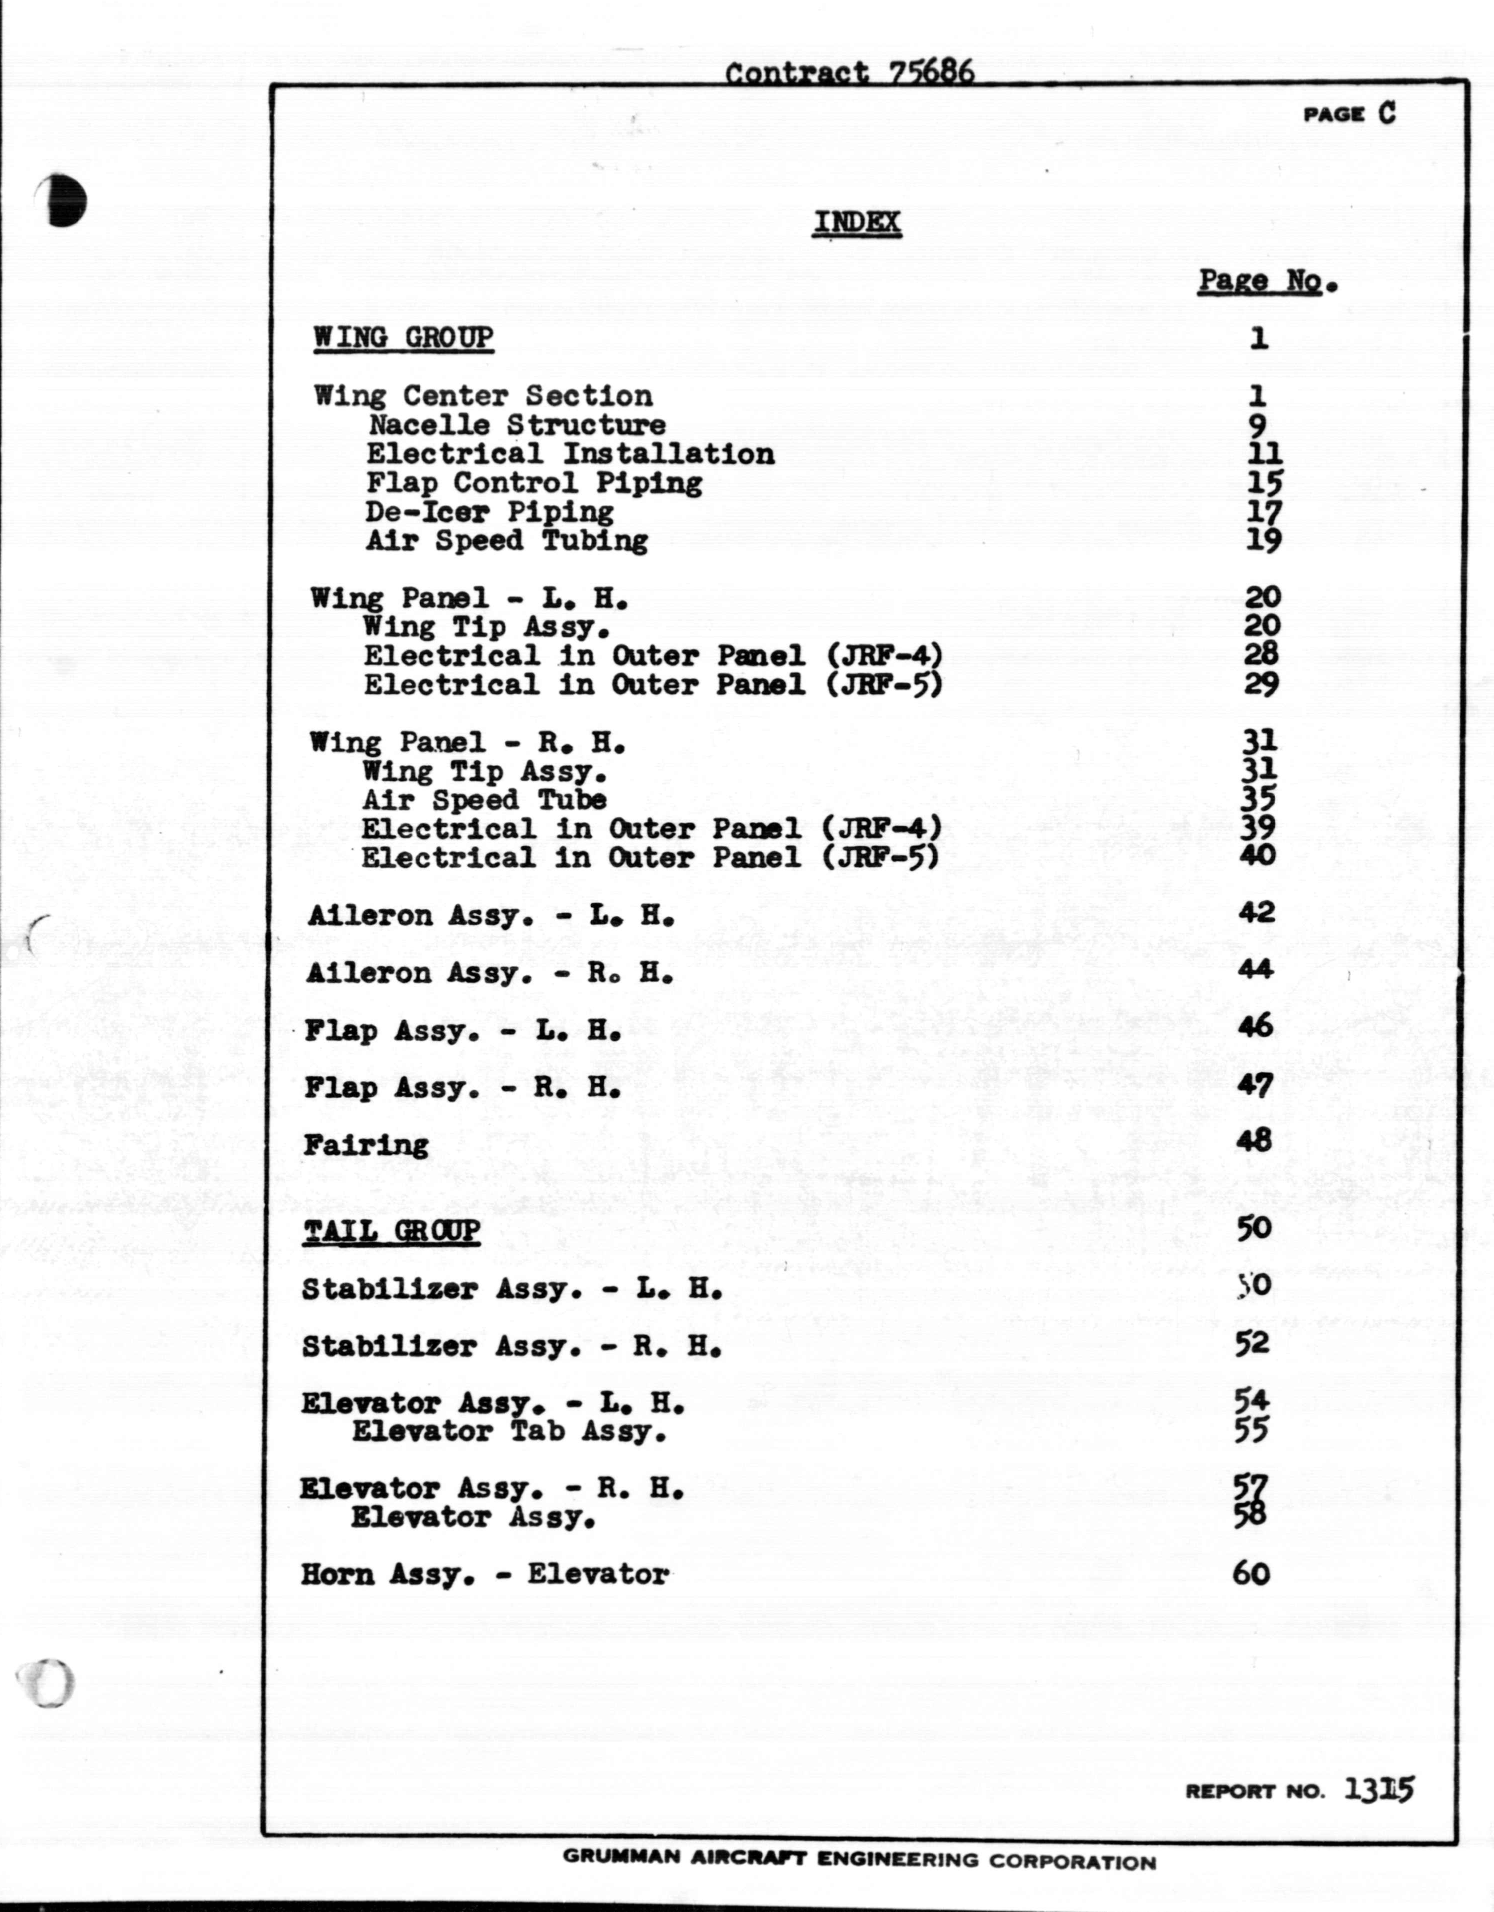 Sample page 3 from AirCorps Library document: Final Spare Parts List with Prices for JRF-4 and -5 Airplanes